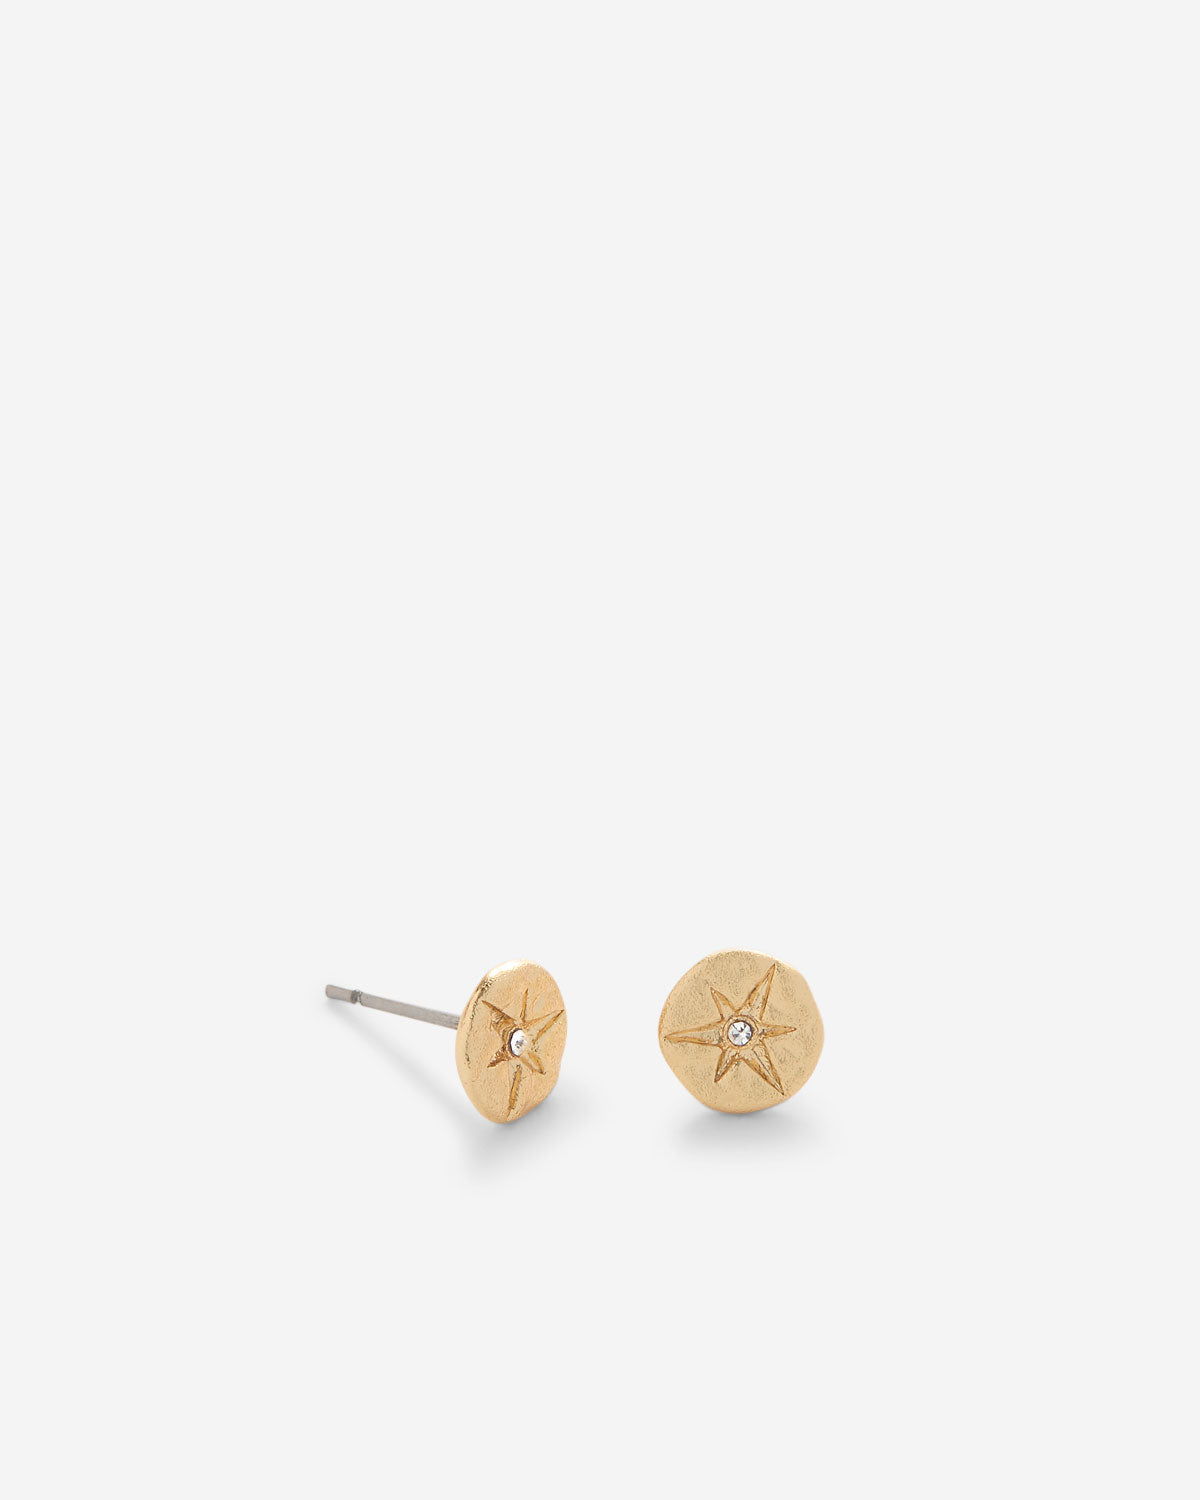 Bryan Anthonys Stars Can't Shine Without Darkness Celestial Stud Earrings in Gold